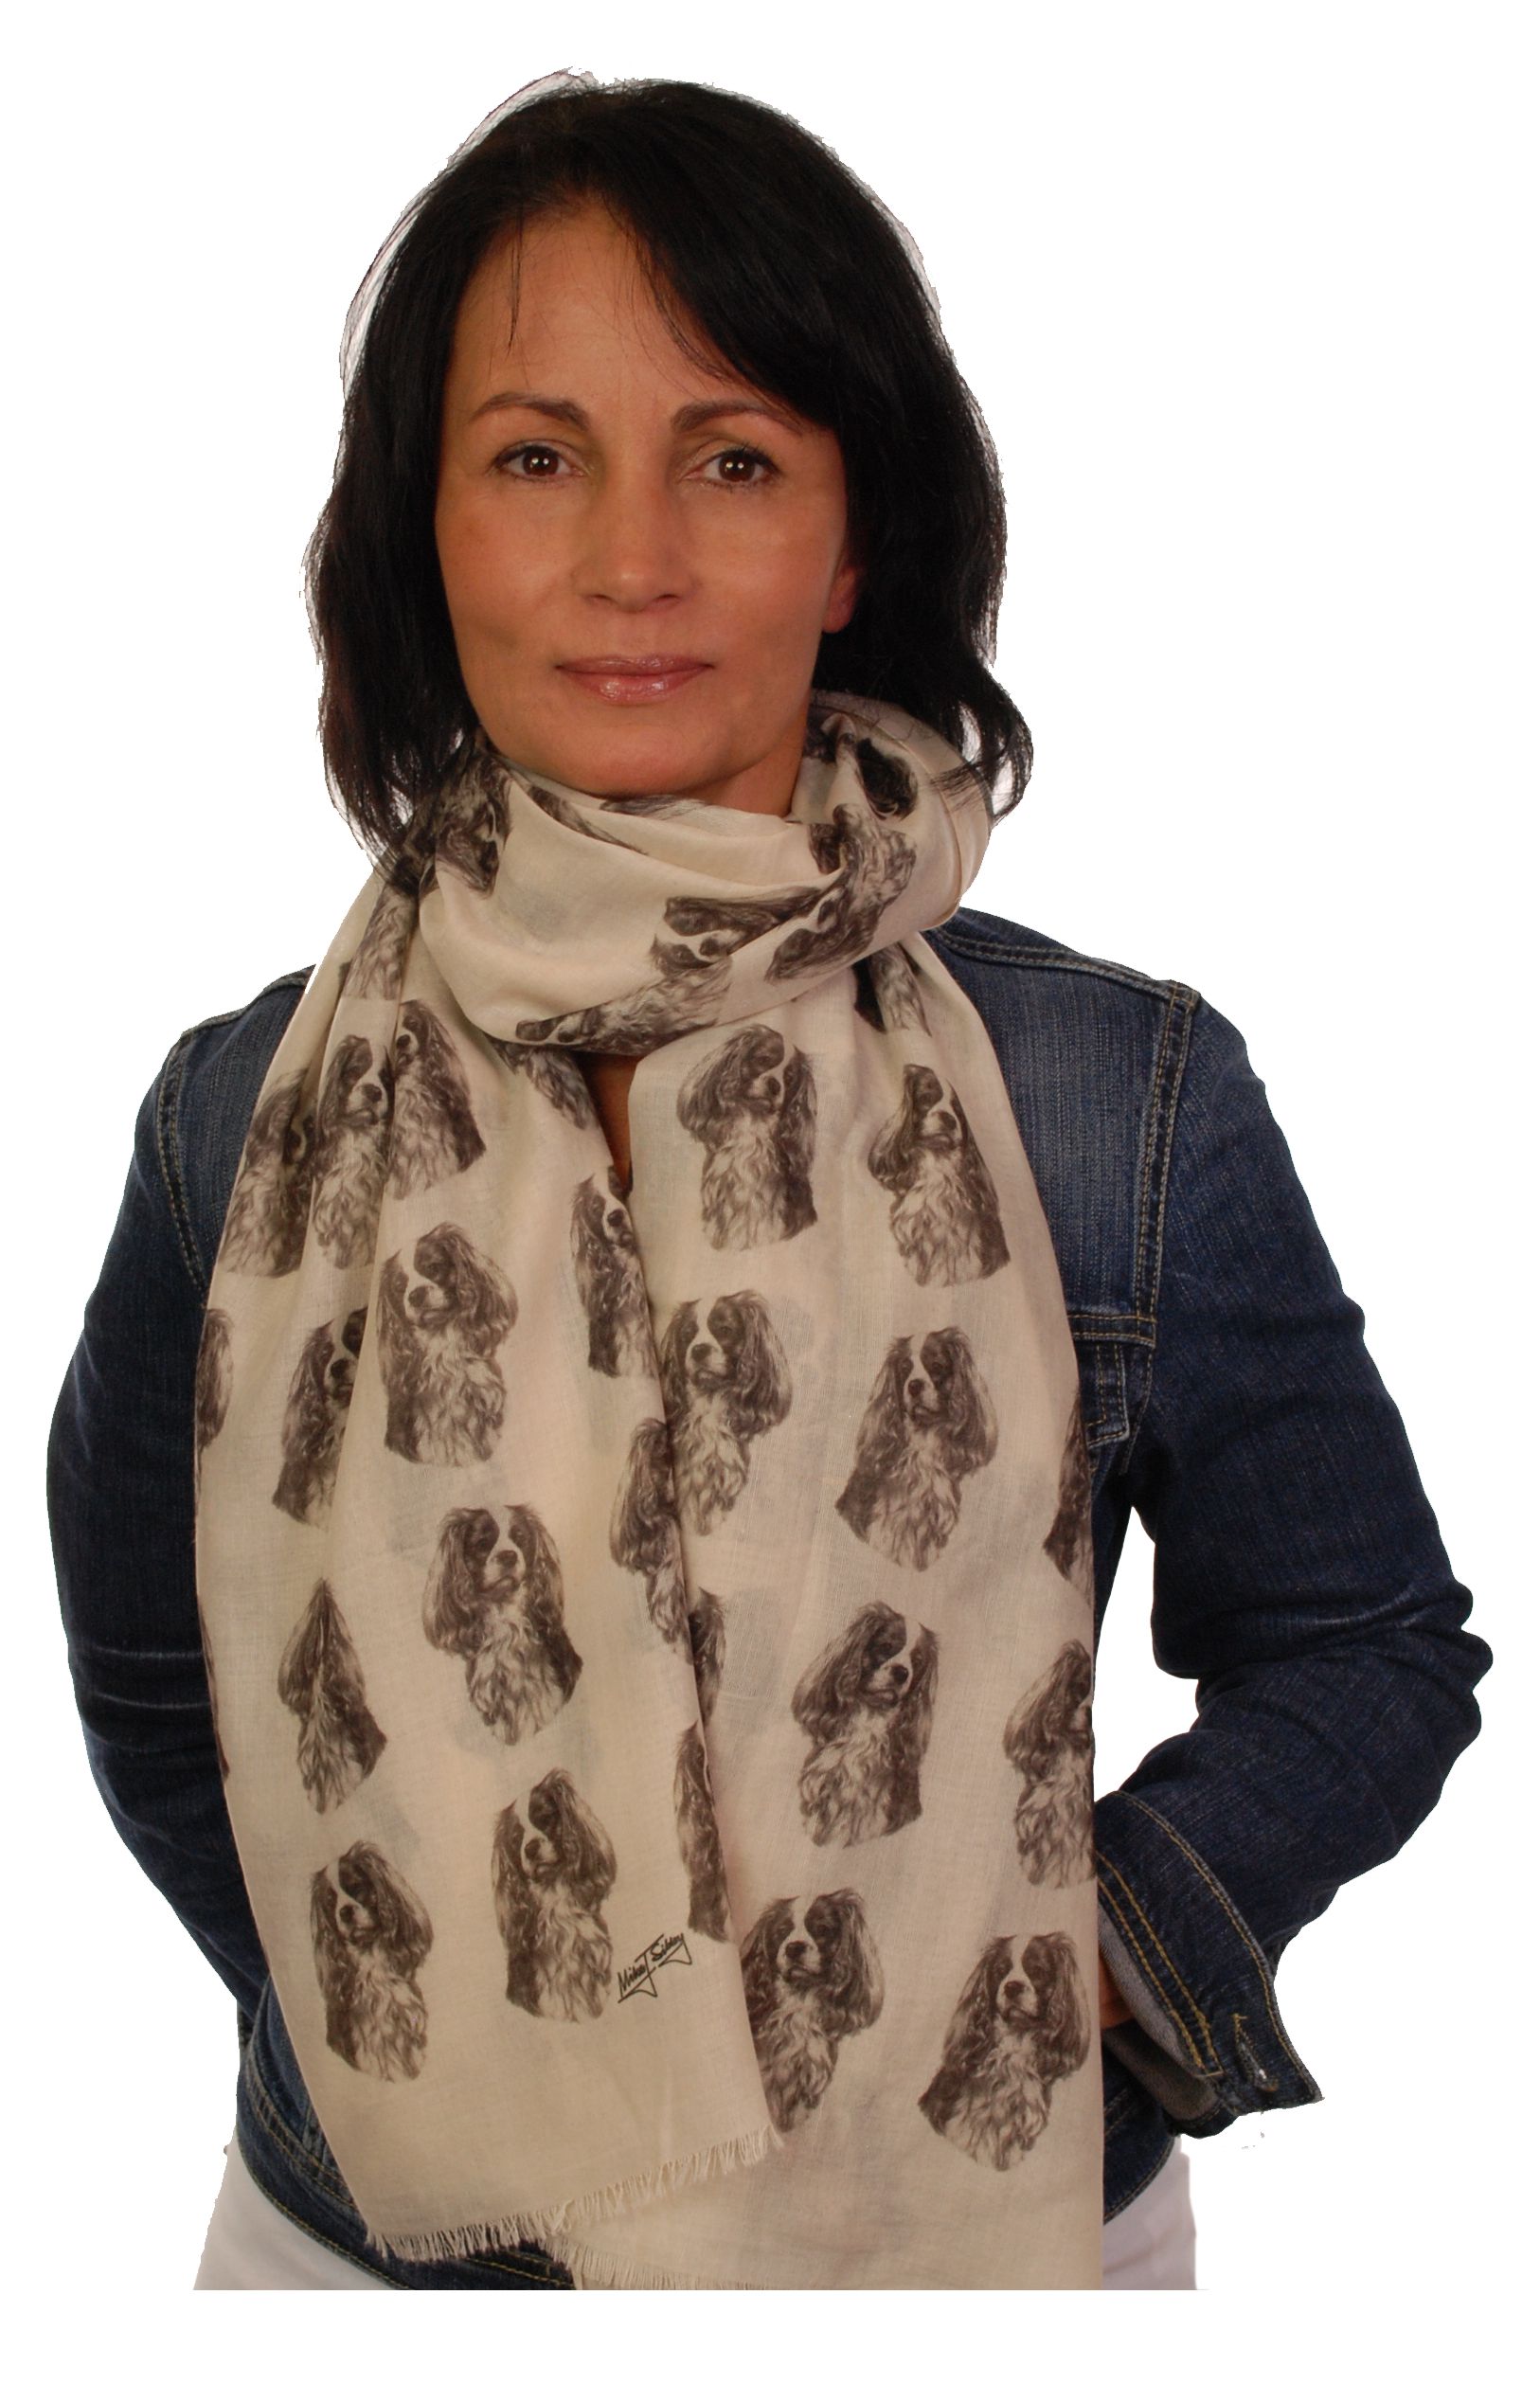 scarf with Poodle dog design on womens ladies fashion printed shawl mike sibley 